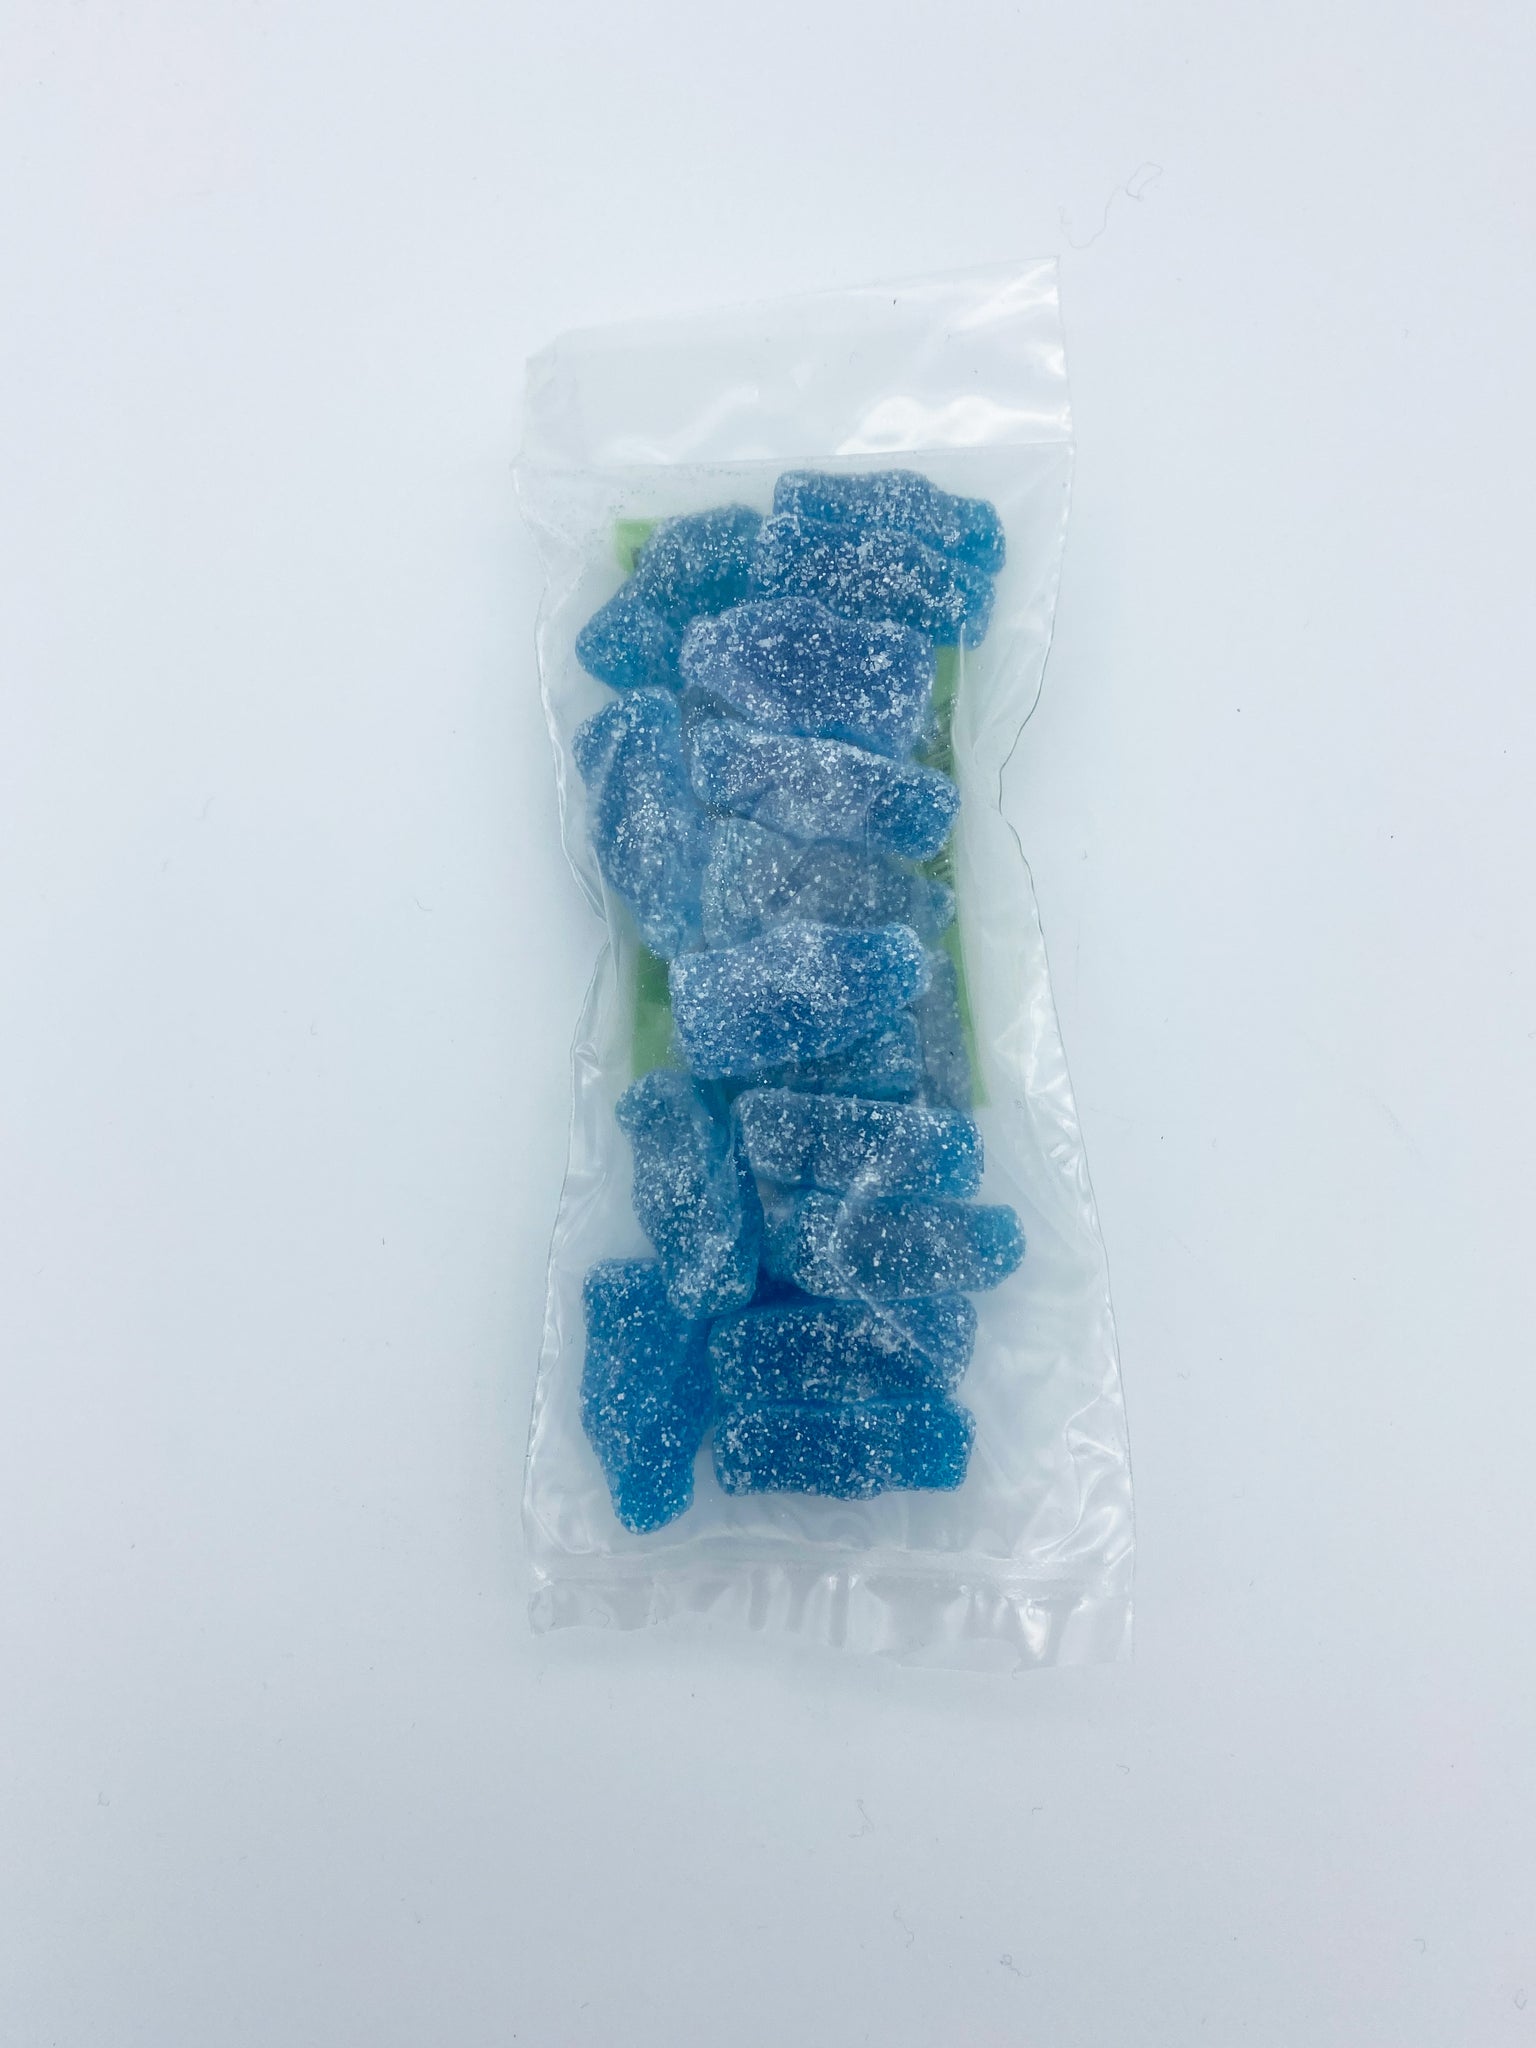 SOUR BLUE RASPBERRY BOTTLES – The Penny Candy Store